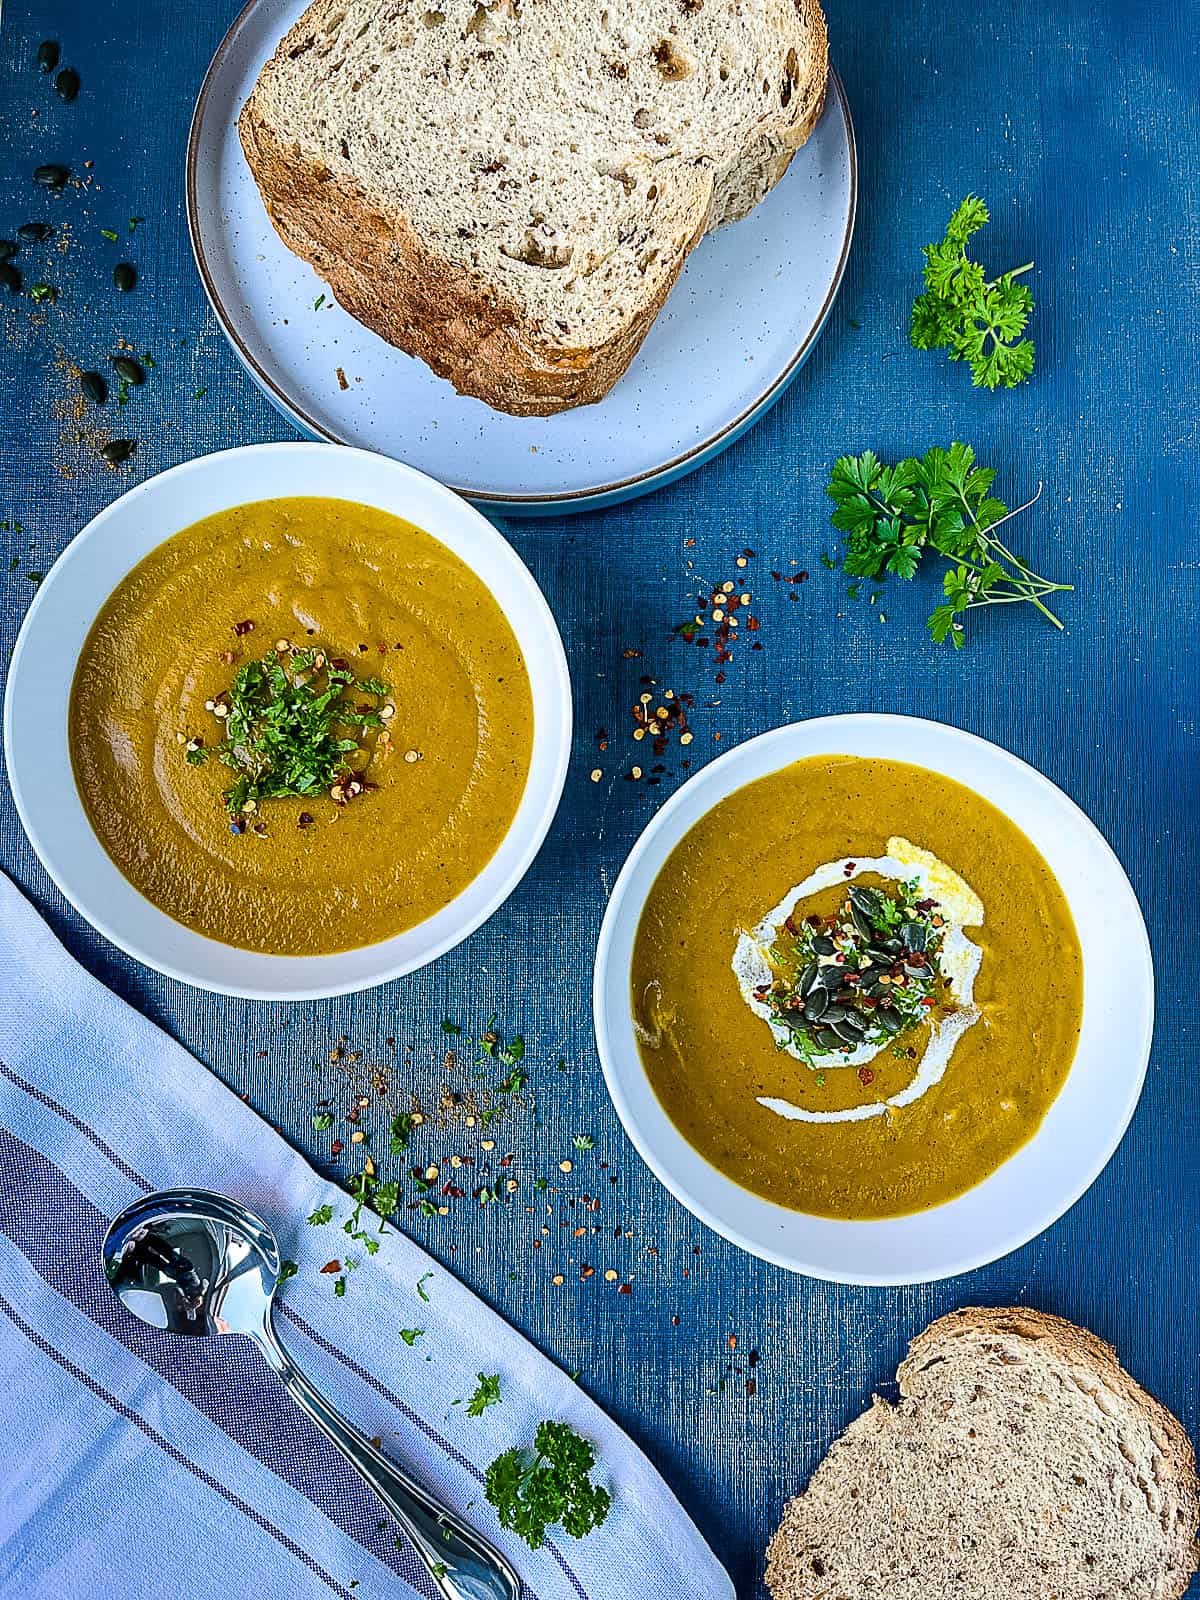 Carrot Carrot and Courgette Zucchini Soup served in bowls with a side of bread